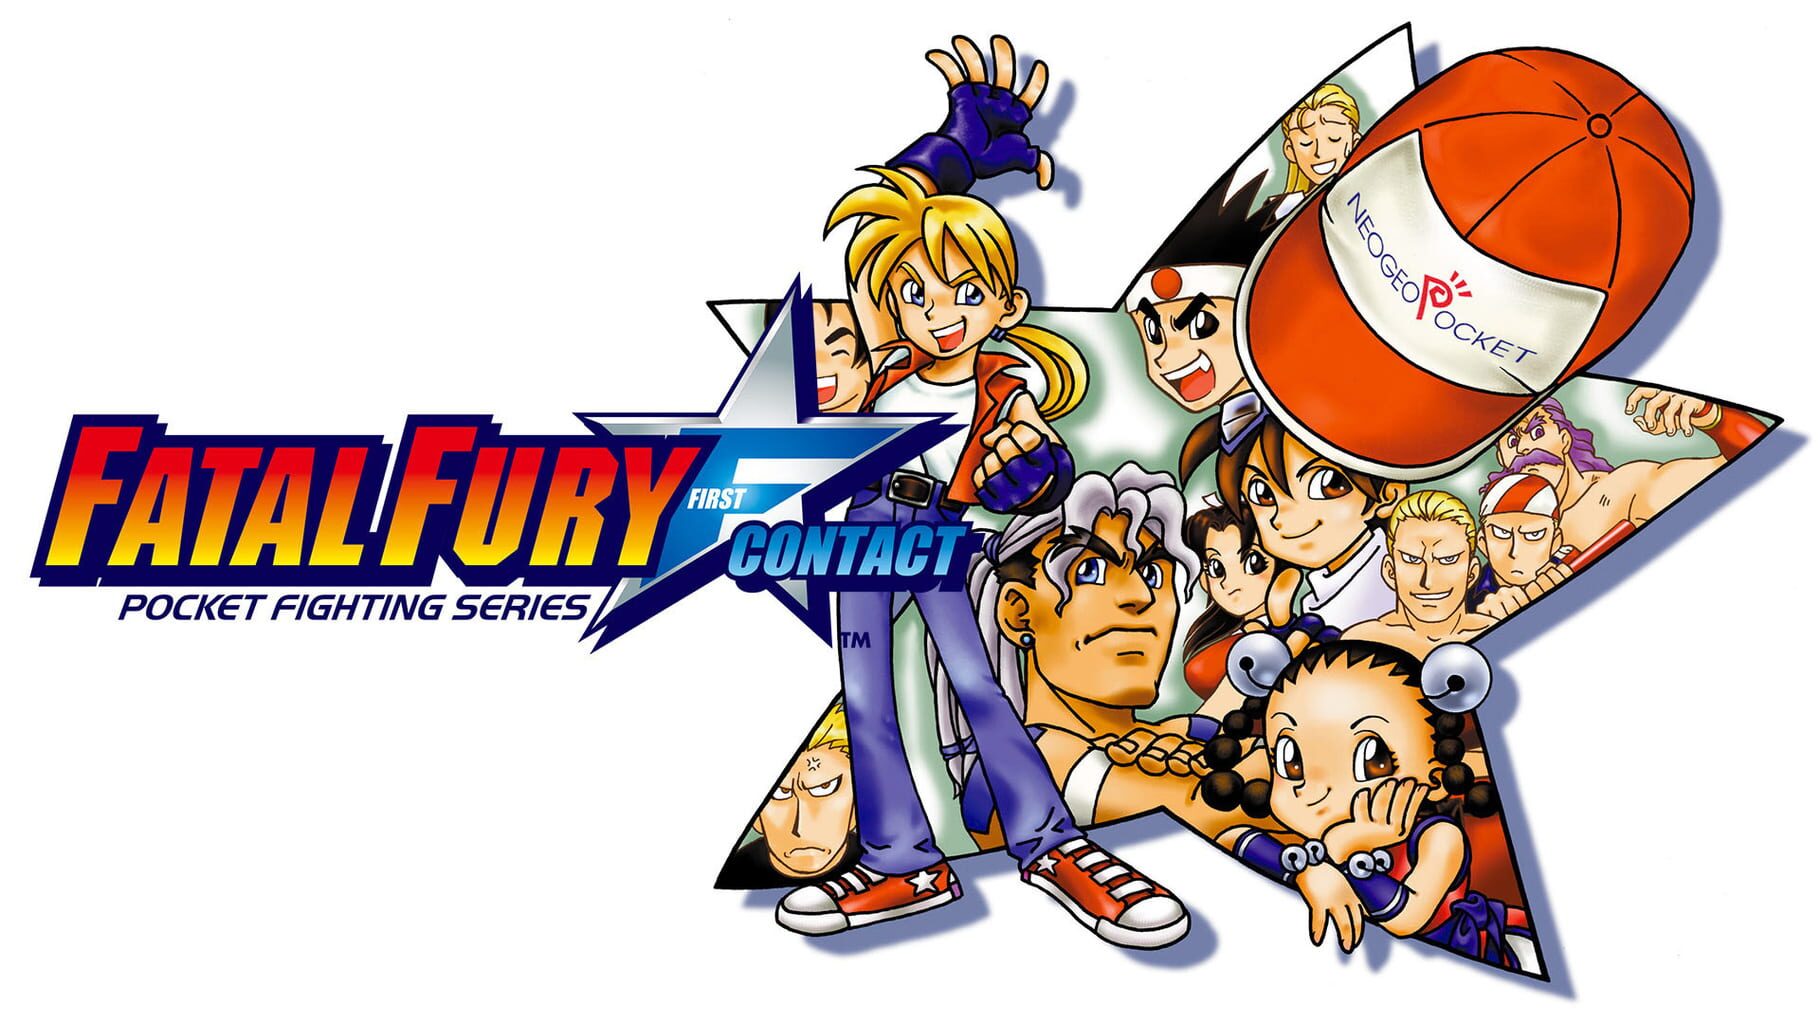 Fatal Fury First Contact artwork